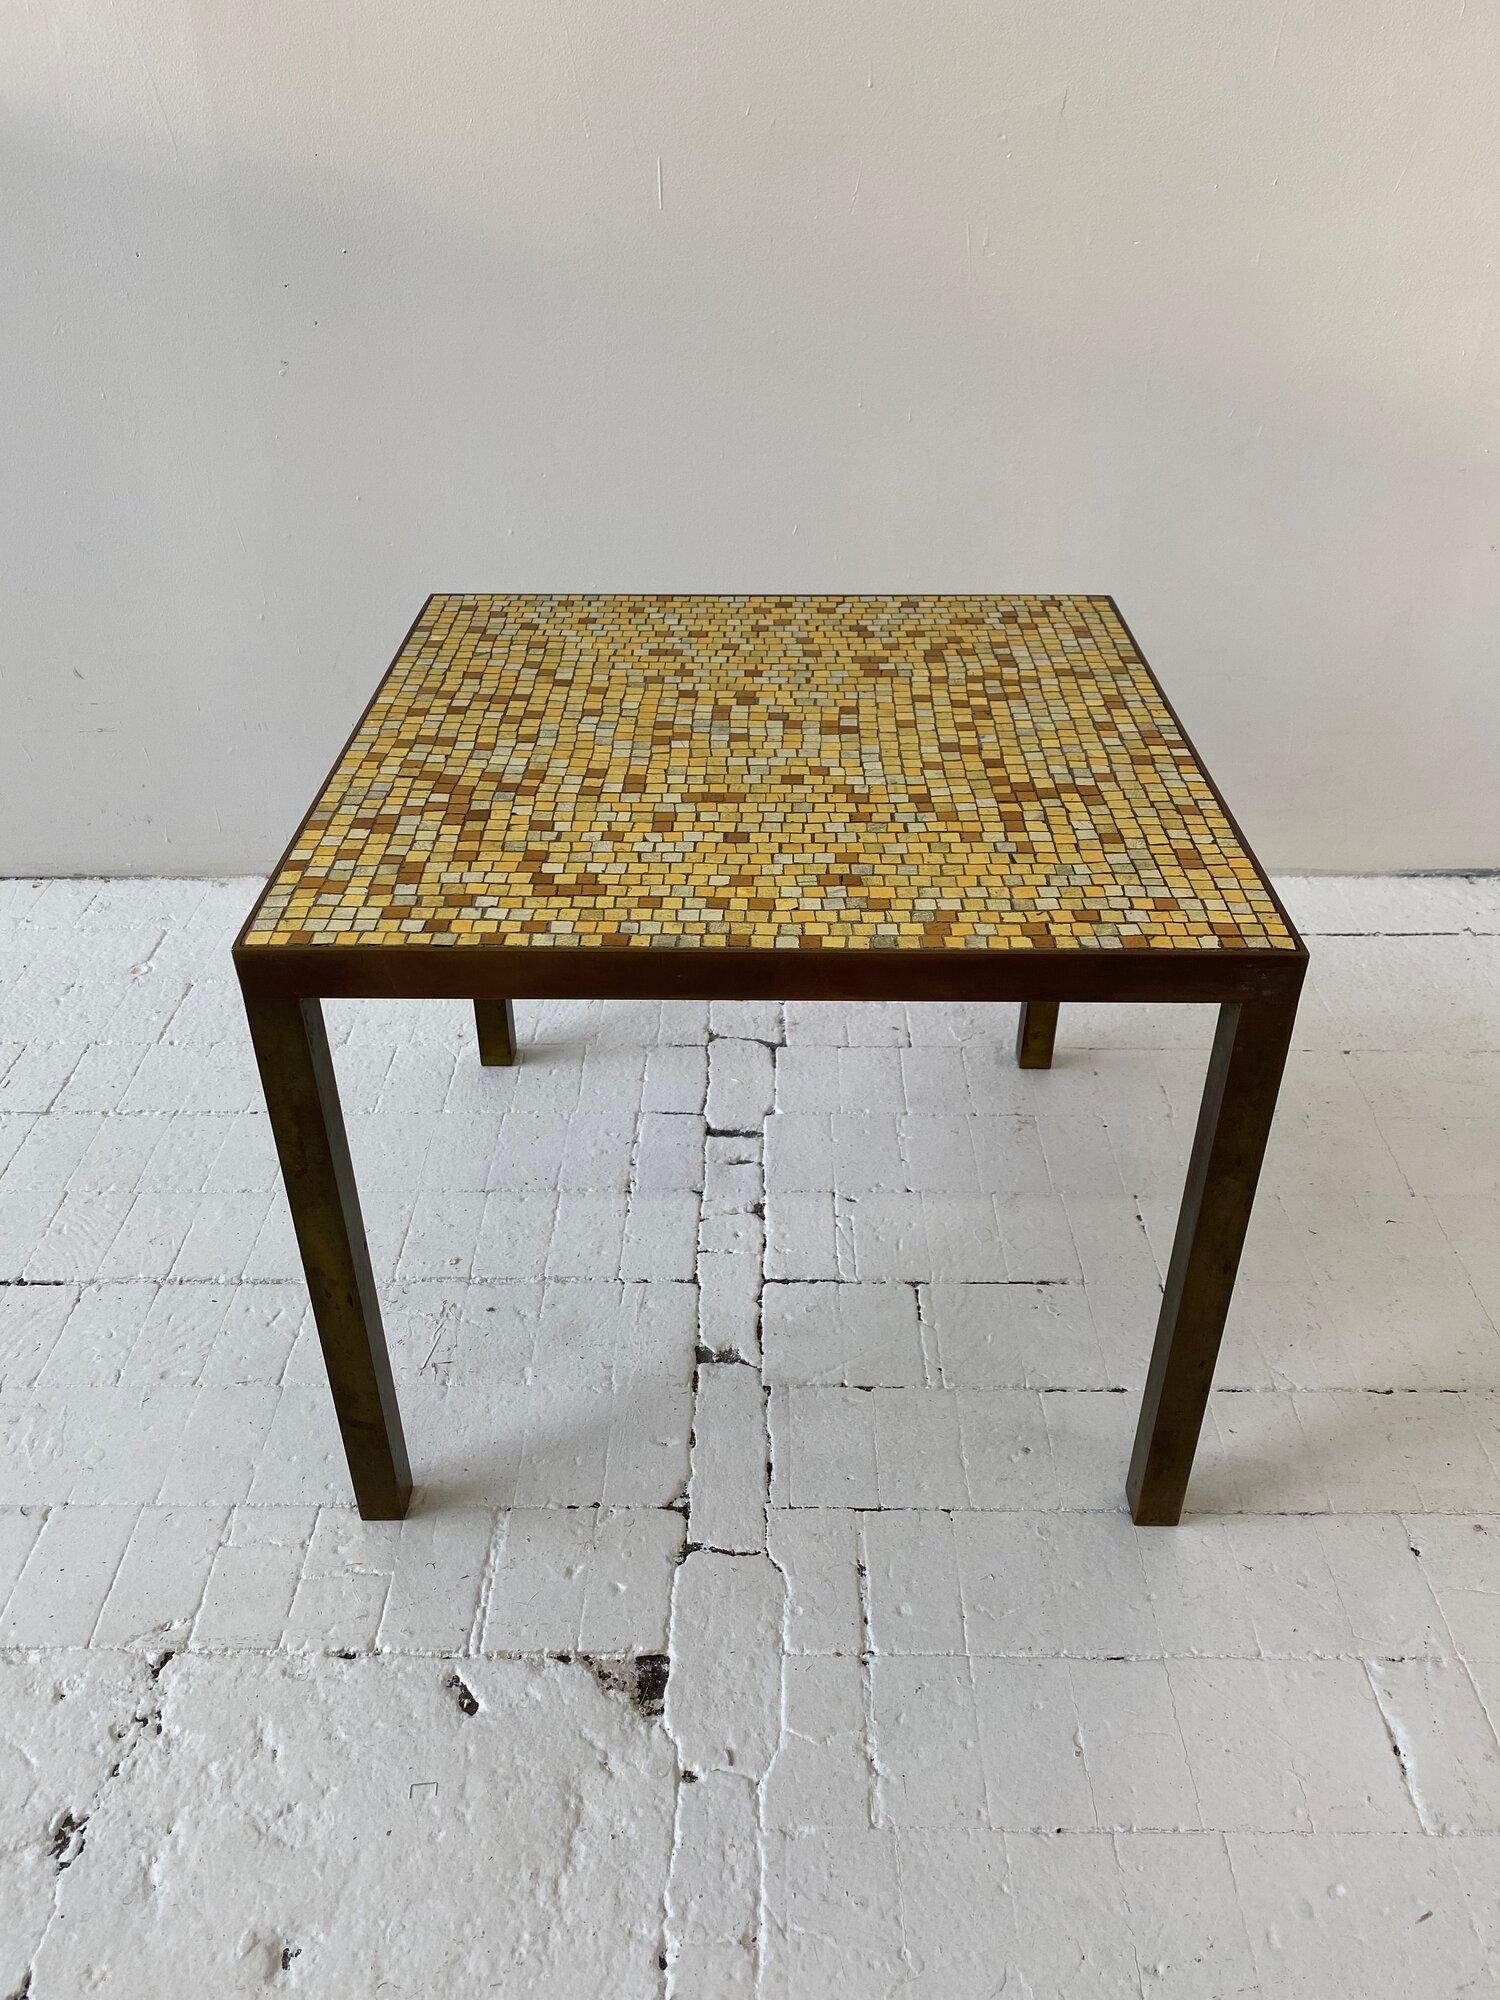 Rare Vintage Hollywood Regency Brass Frame and Glass Metallic Mosaic Tile Tables For Sale 3